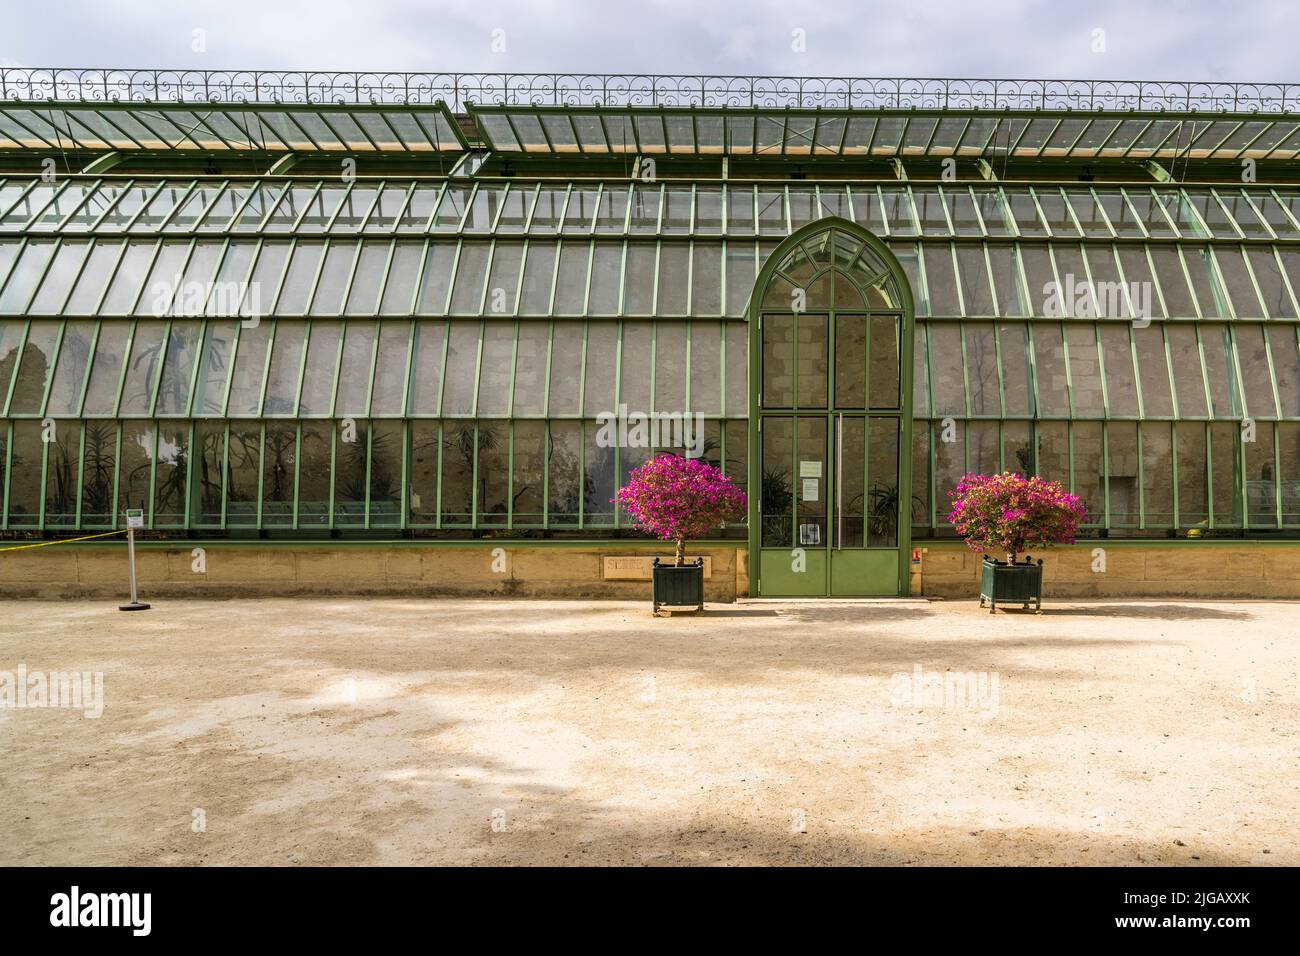 Leaning greenhouse in the botanical garden of Montpellier, France Stock Photo